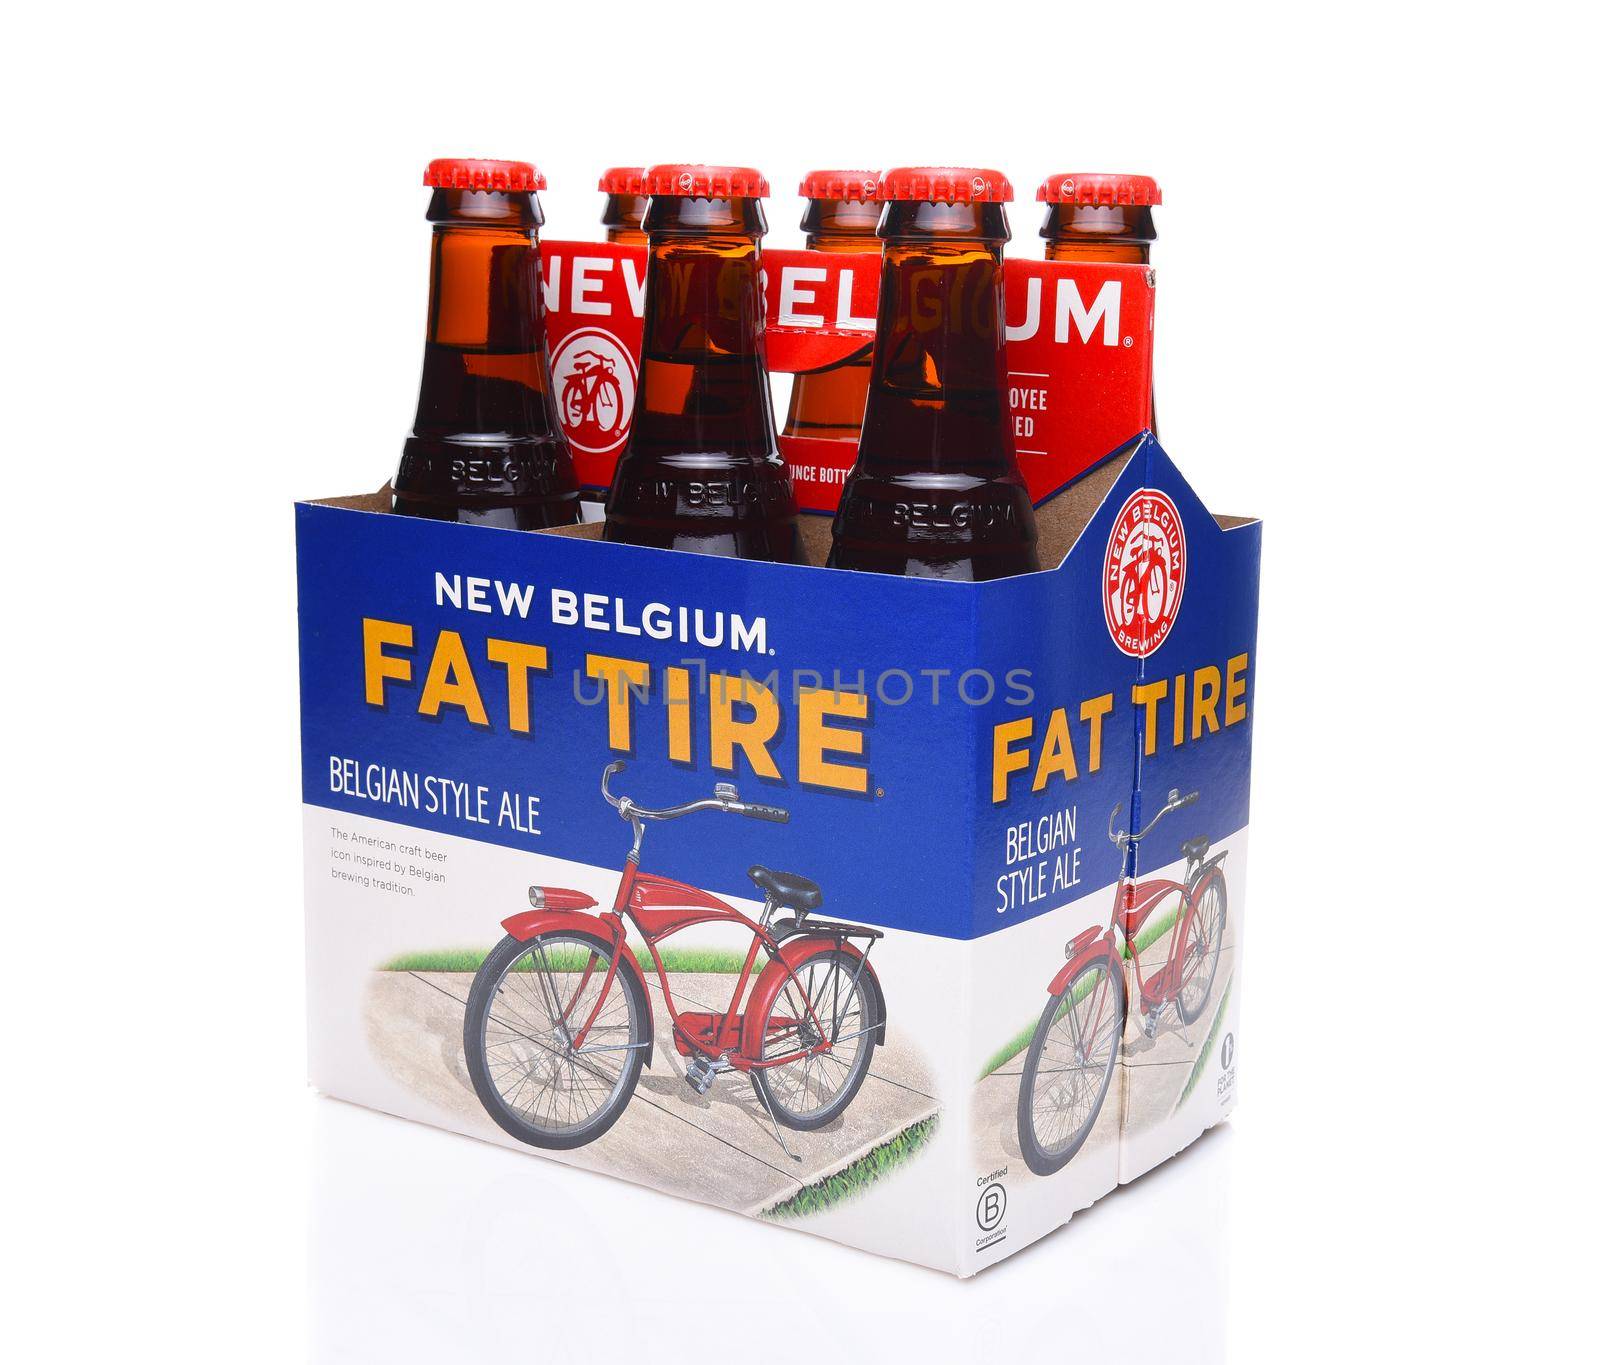 IRVINE, CALIFORNIA - December 14, 2017: Fat Tire Amber Ale. 6 Pack of Fat Tire Amber Ale from the New Belgium Brewing Company, of Fort Collins, Colorado.